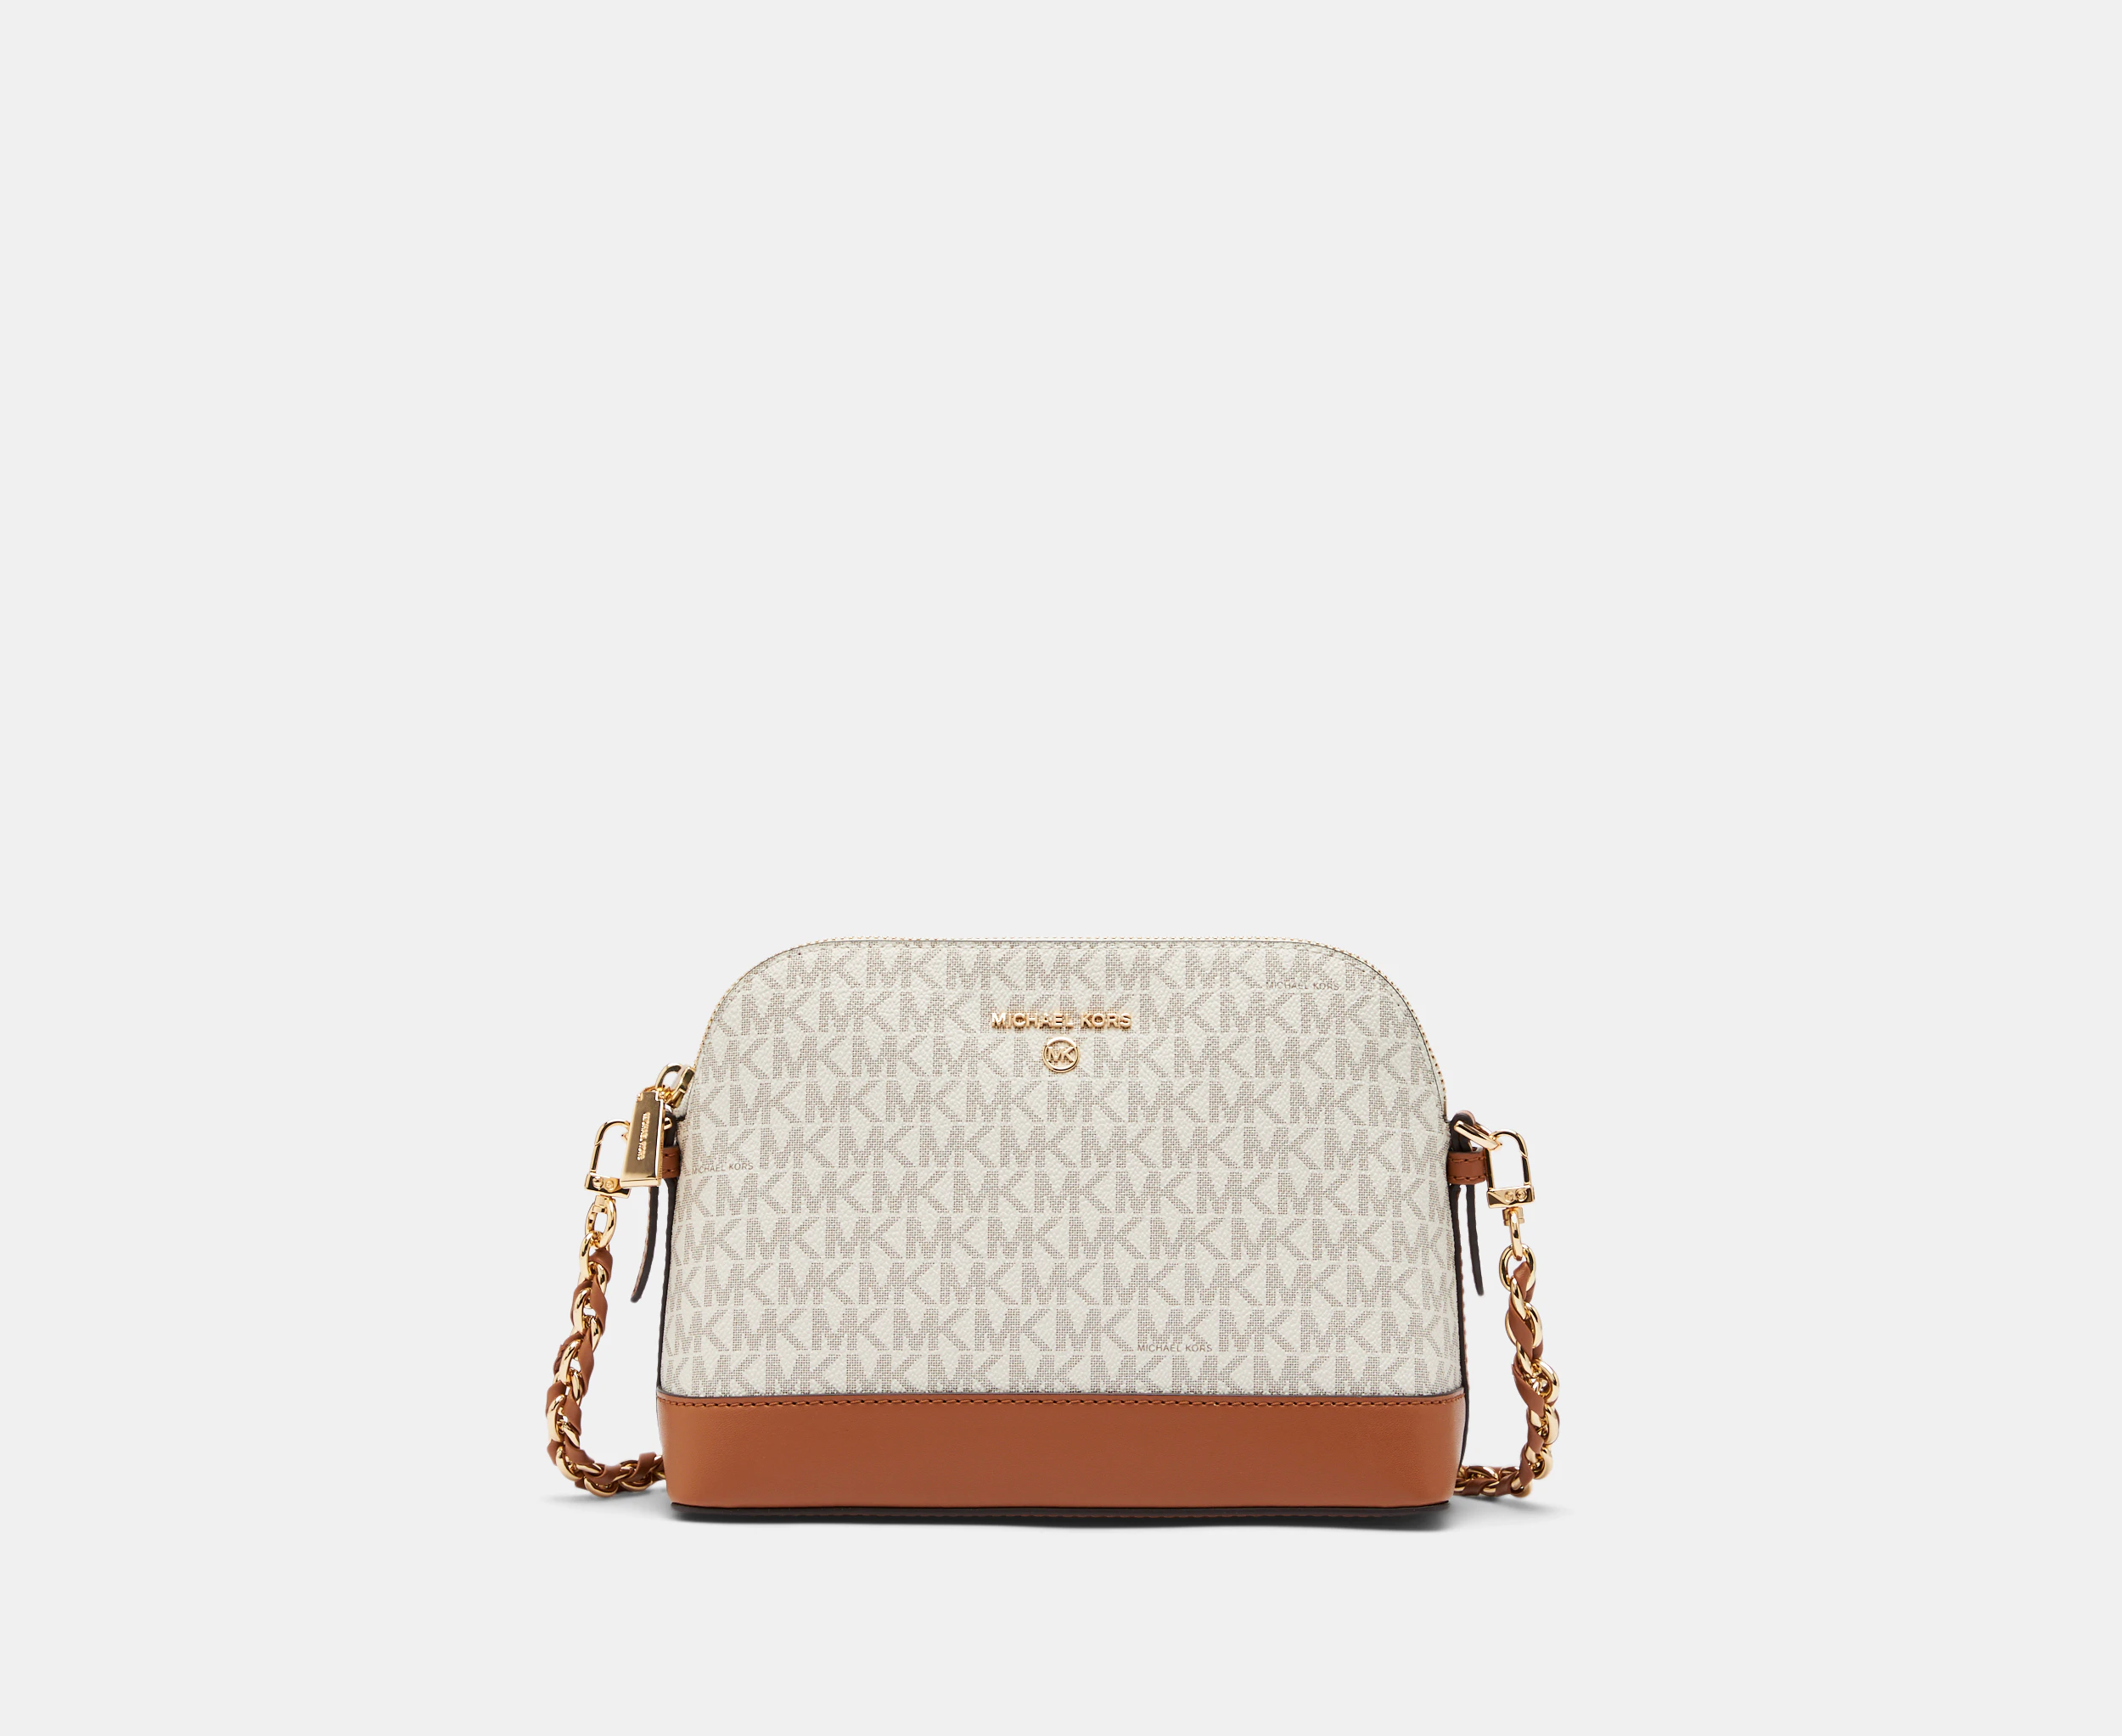 Popular crossbody bags of 2021: Coach, Michael Kors, Madewell and more